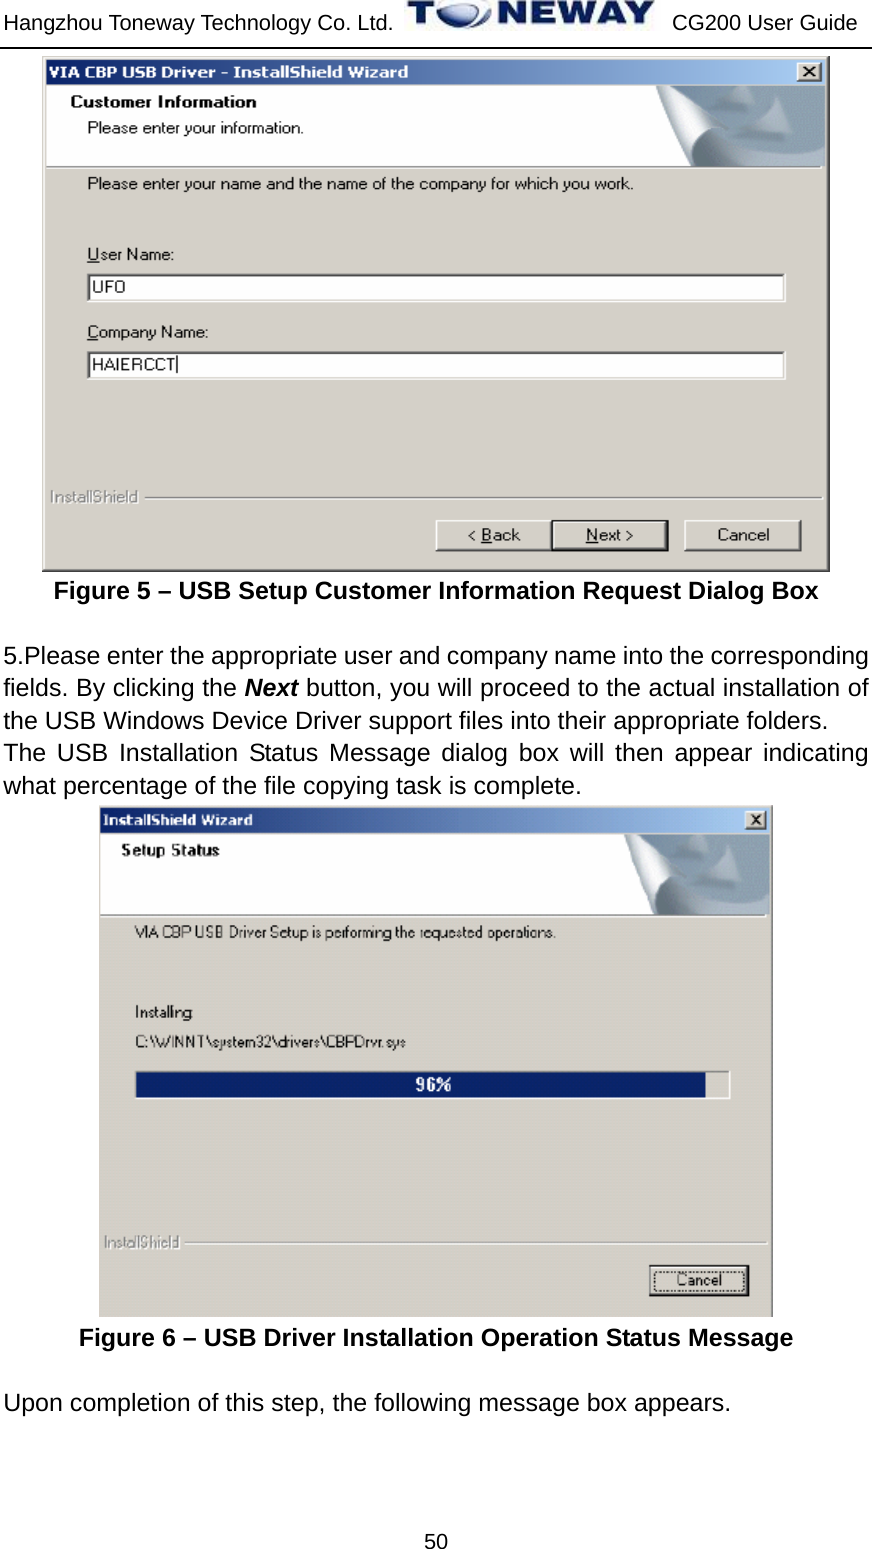 Hangzhou Toneway Technology Co. Ltd.    CG200 User Guide 50  Figure 5 – USB Setup Customer Information Request Dialog Box  5.Please enter the appropriate user and company name into the corresponding fields. By clicking the Next button, you will proceed to the actual installation of the USB Windows Device Driver support files into their appropriate folders. The USB Installation Status Message dialog box will then appear indicating what percentage of the file copying task is complete.  Figure 6 – USB Driver Installation Operation Status Message  Upon completion of this step, the following message box appears. 